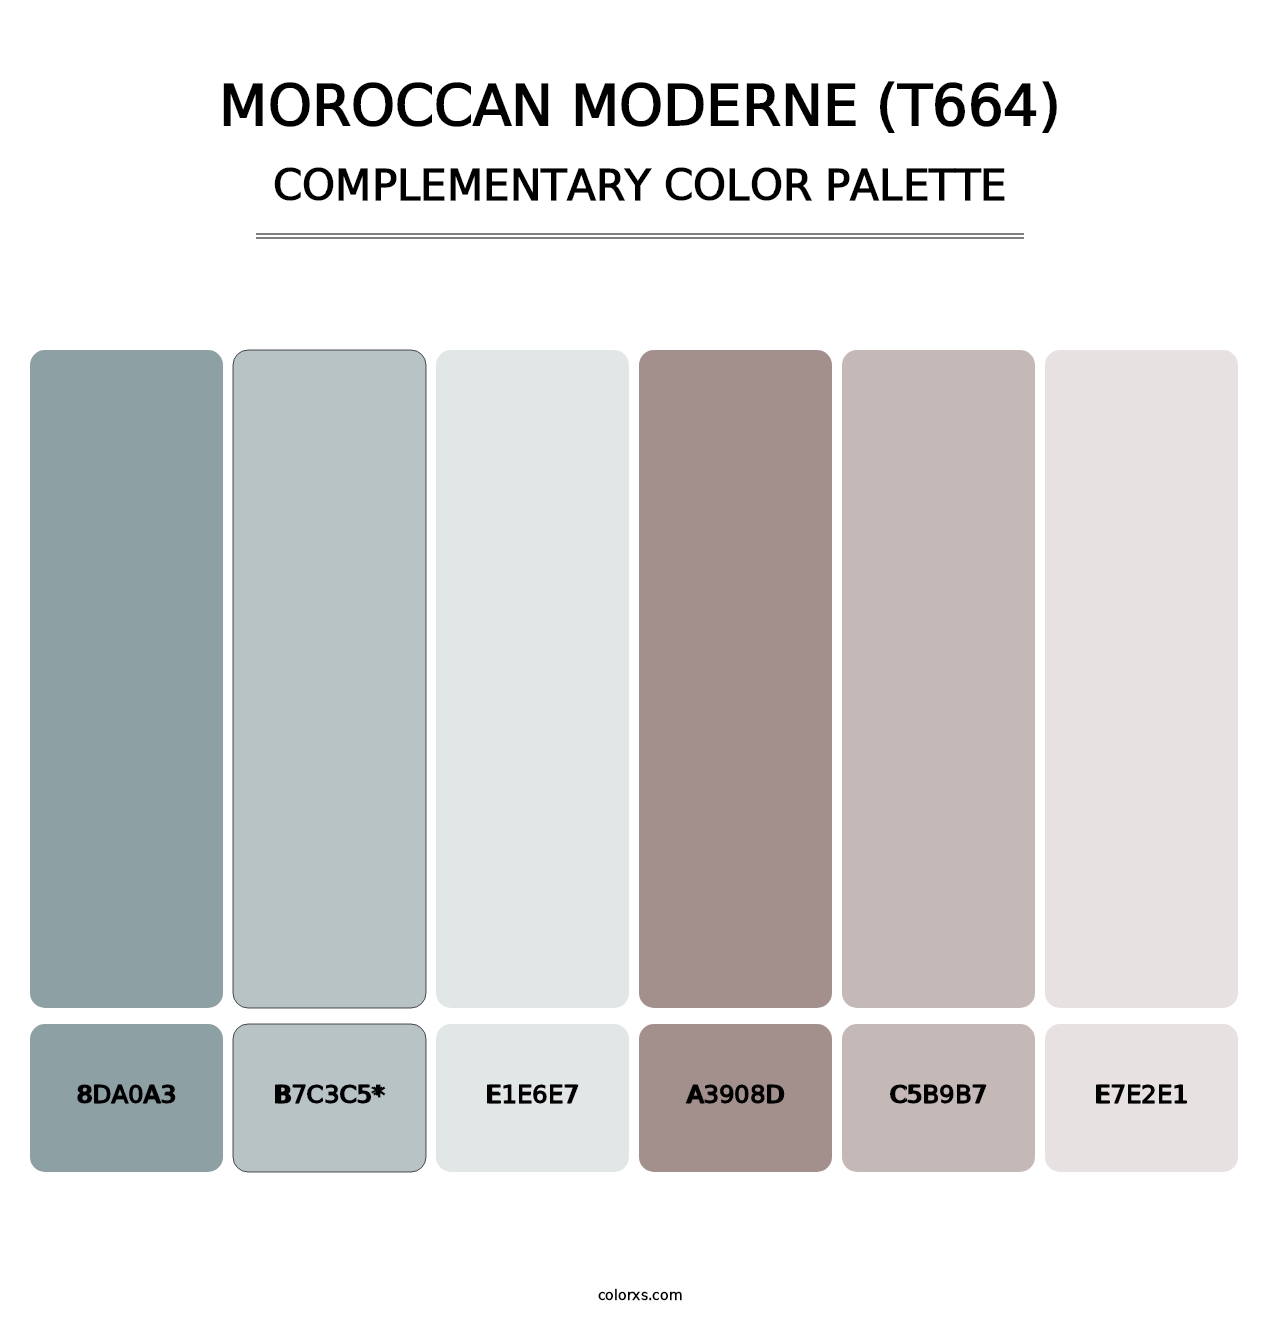 Moroccan Moderne (T664) - Complementary Color Palette